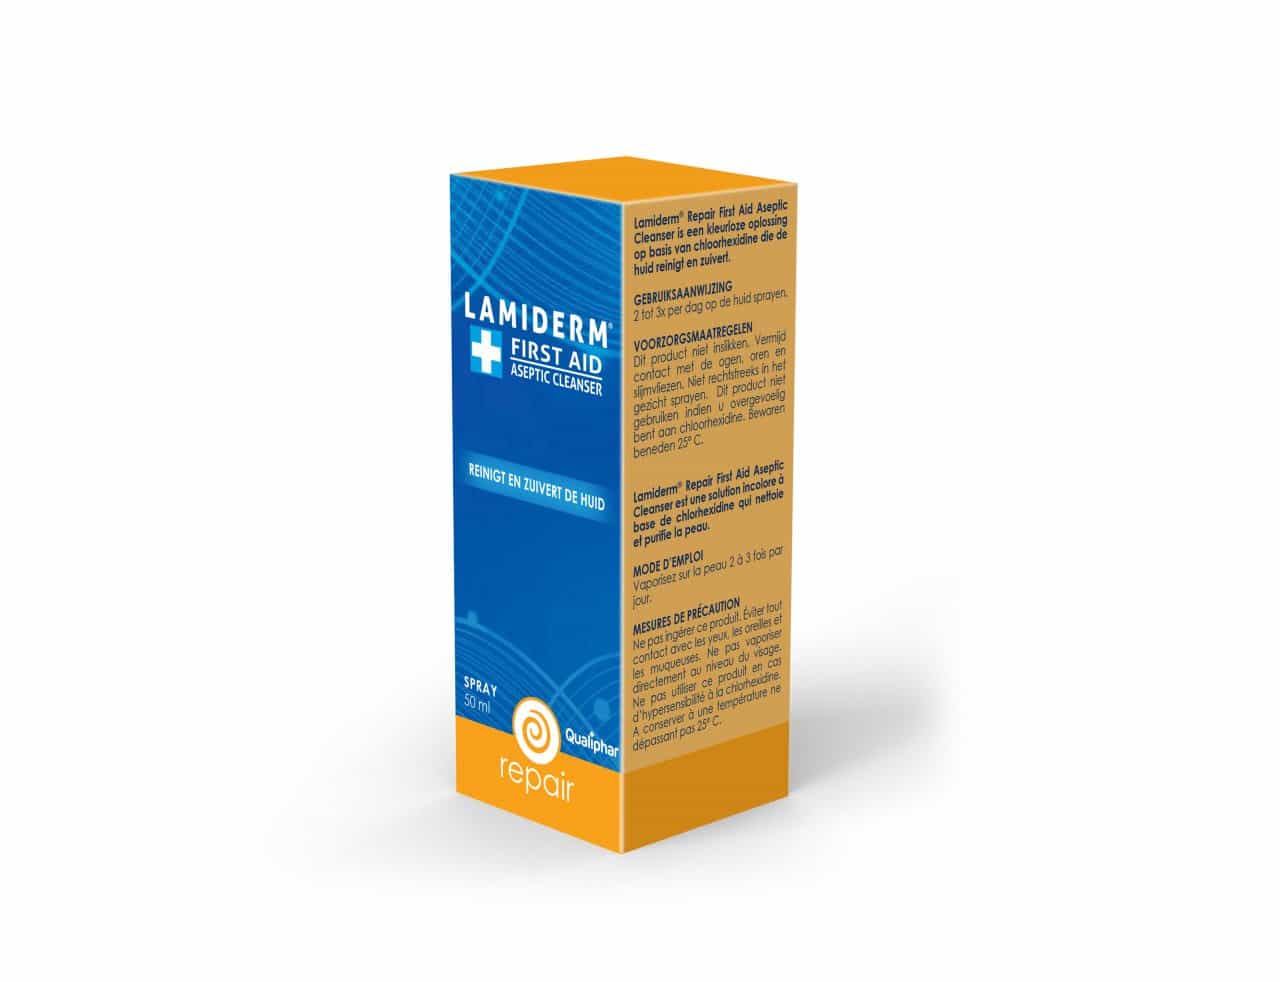 Lamiderm Repair First Aid Aseptic Cleaning Spray